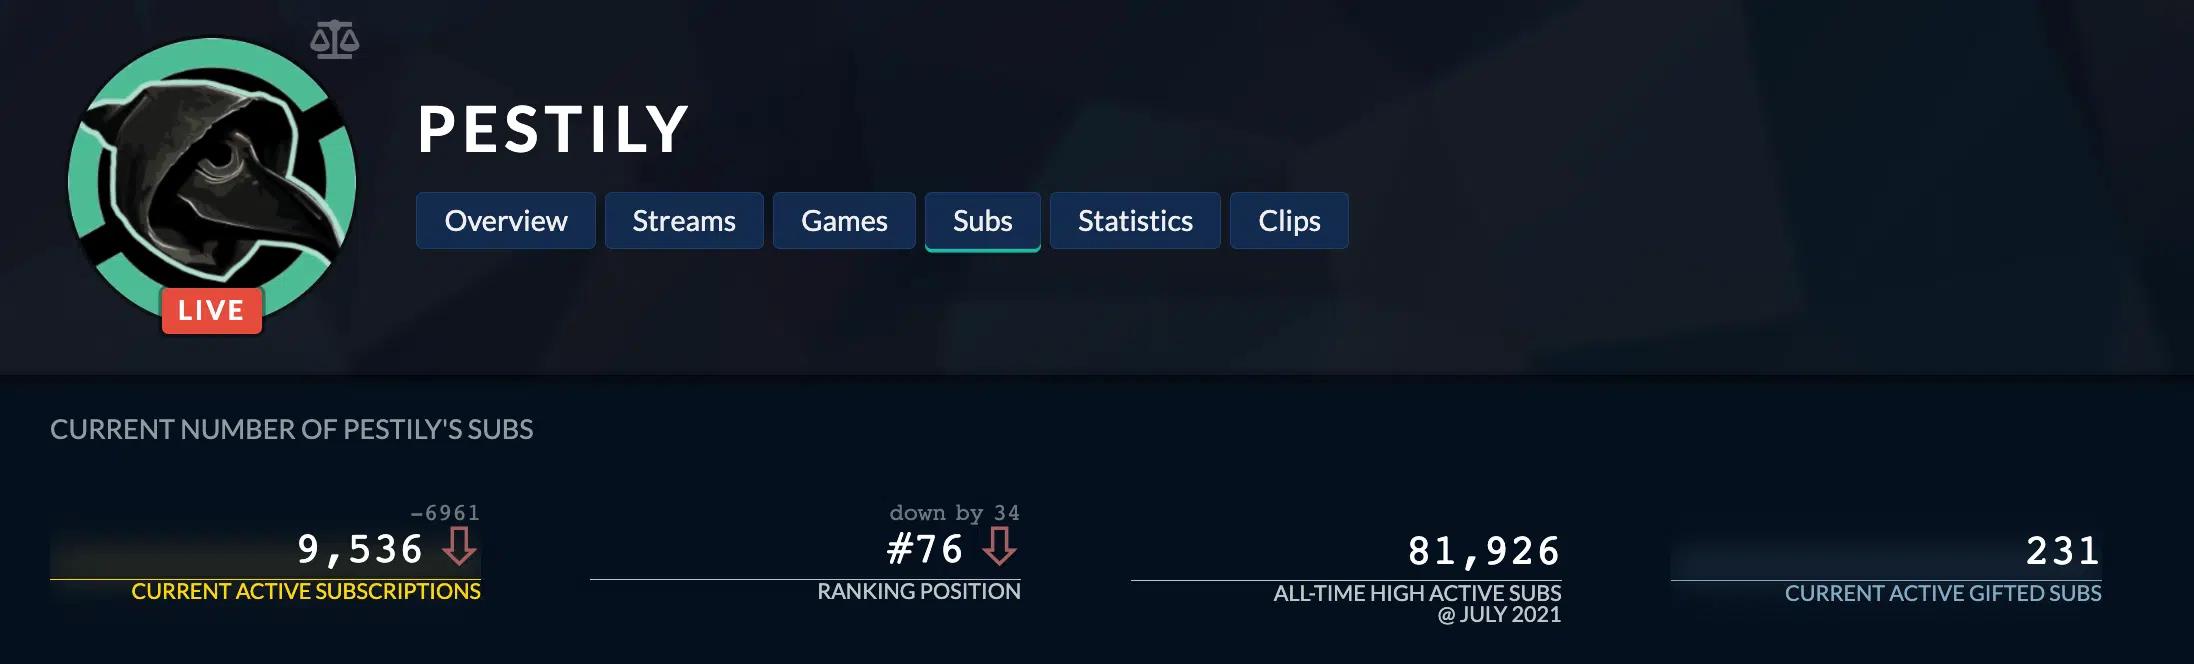 Pestily's Twitch stats on TwitchTracker